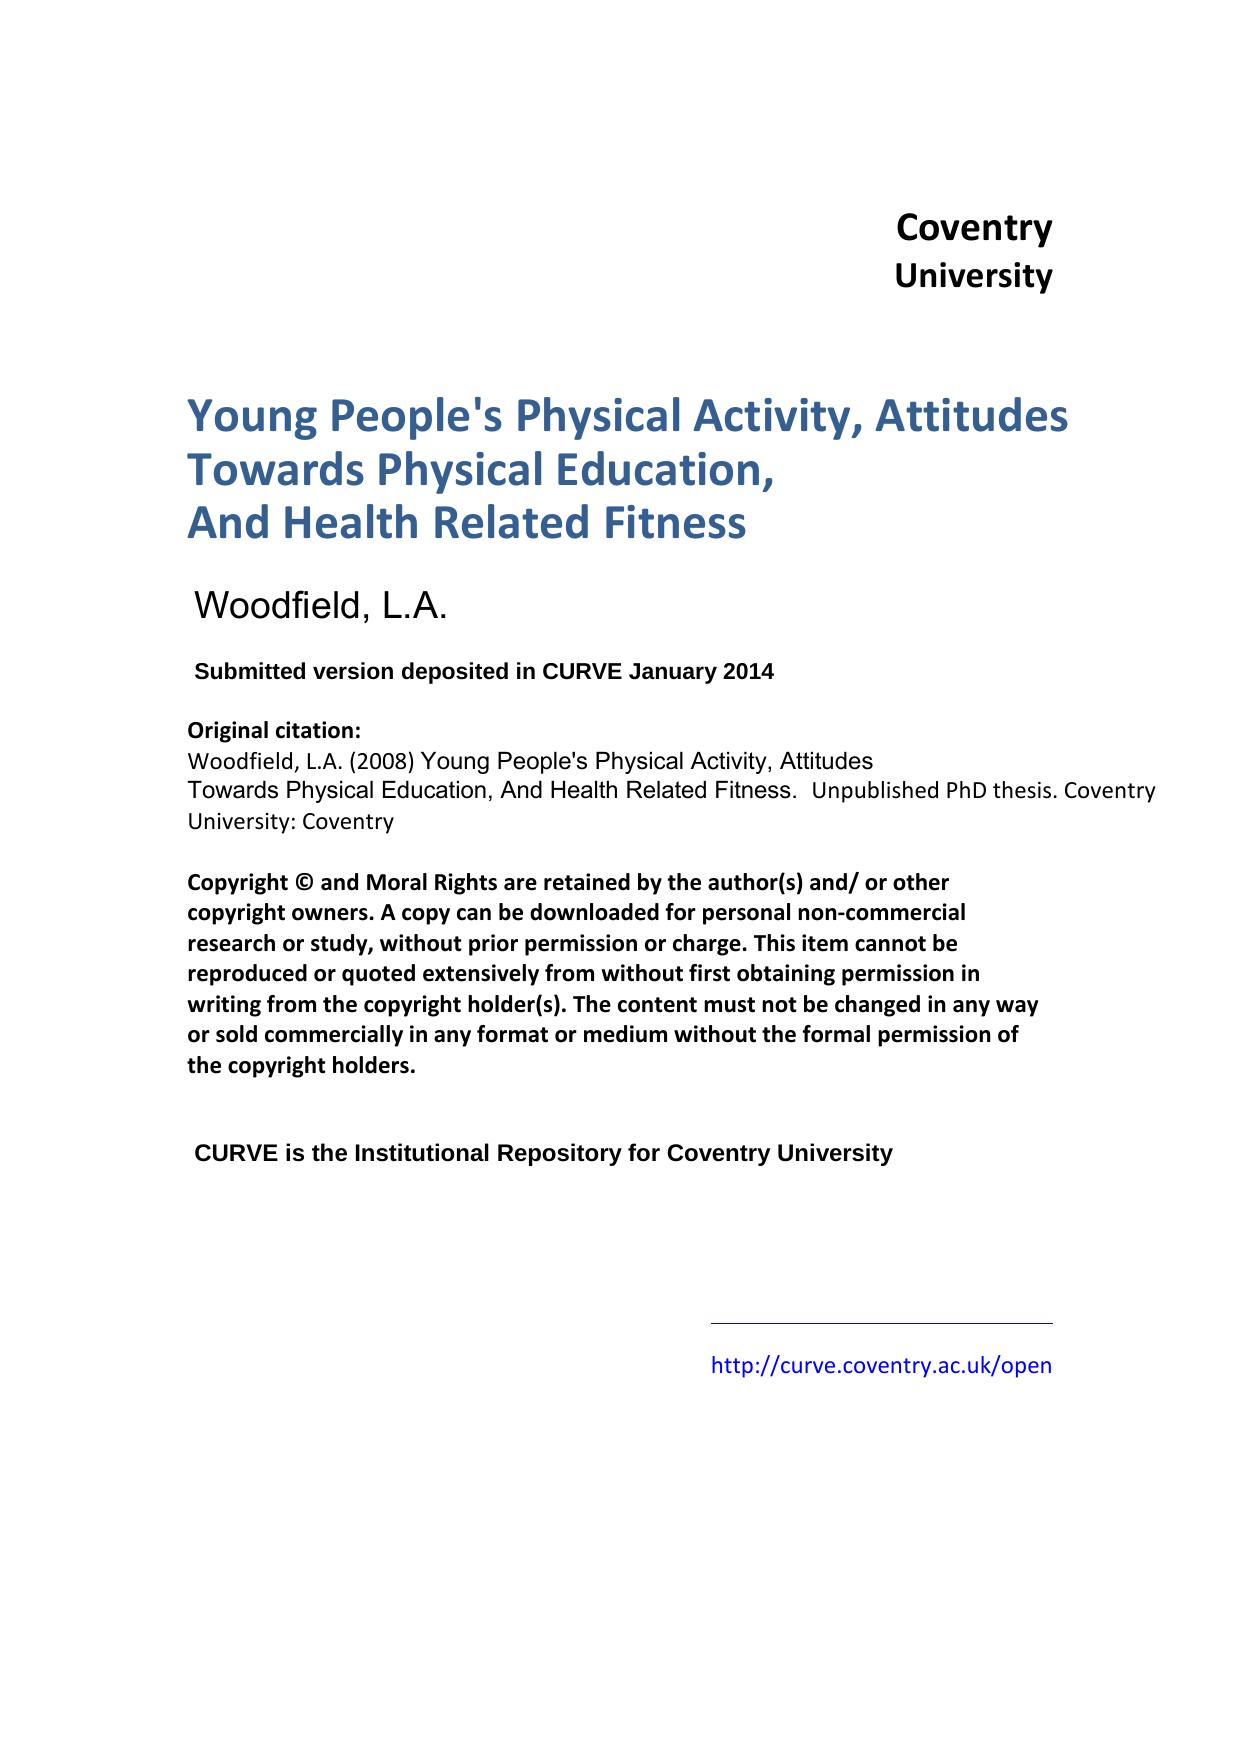 Young People's Physical Activity, Attitudes Towards Physical Education, And Health Related Fitness 2014